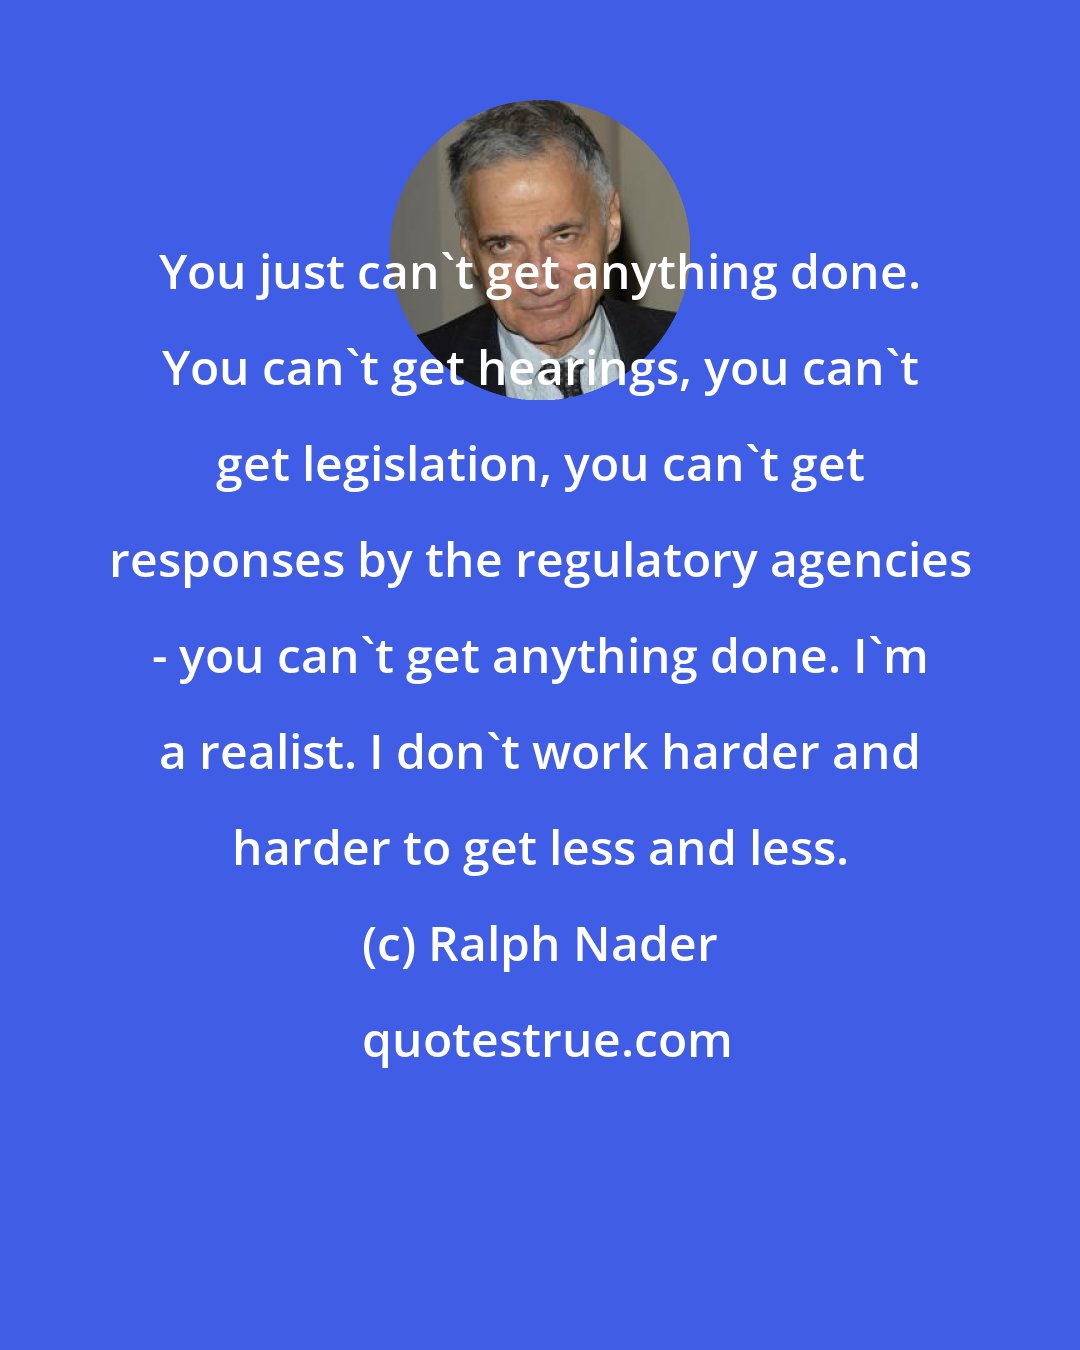 Ralph Nader: You just can't get anything done. You can't get hearings, you can't get legislation, you can't get responses by the regulatory agencies - you can't get anything done. I'm a realist. I don't work harder and harder to get less and less.